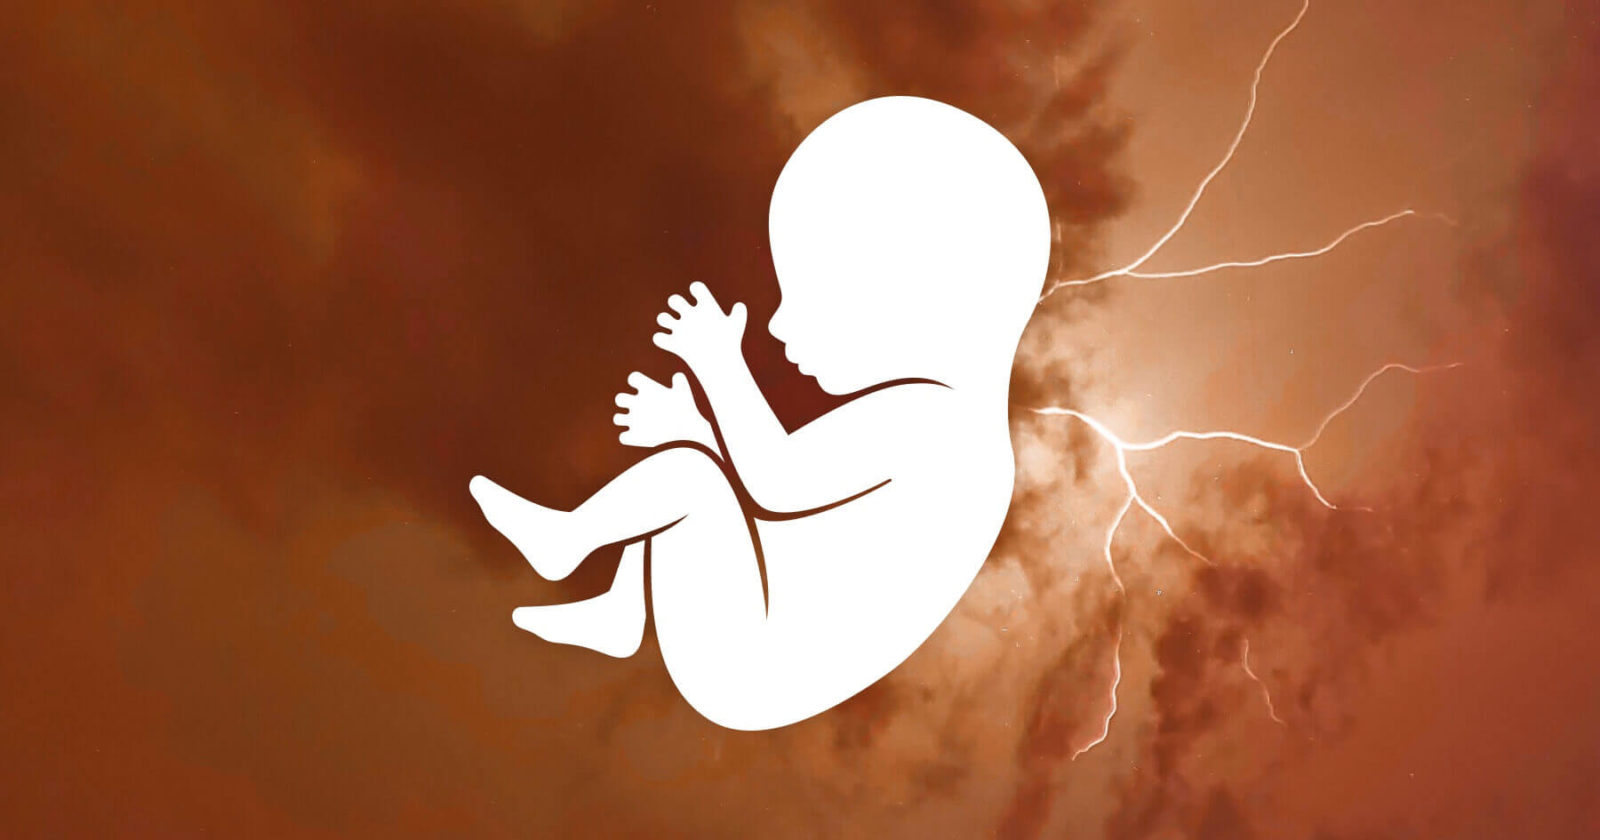 There is now good evidence that an unborn baby can feel pain from 12 weeks gestation